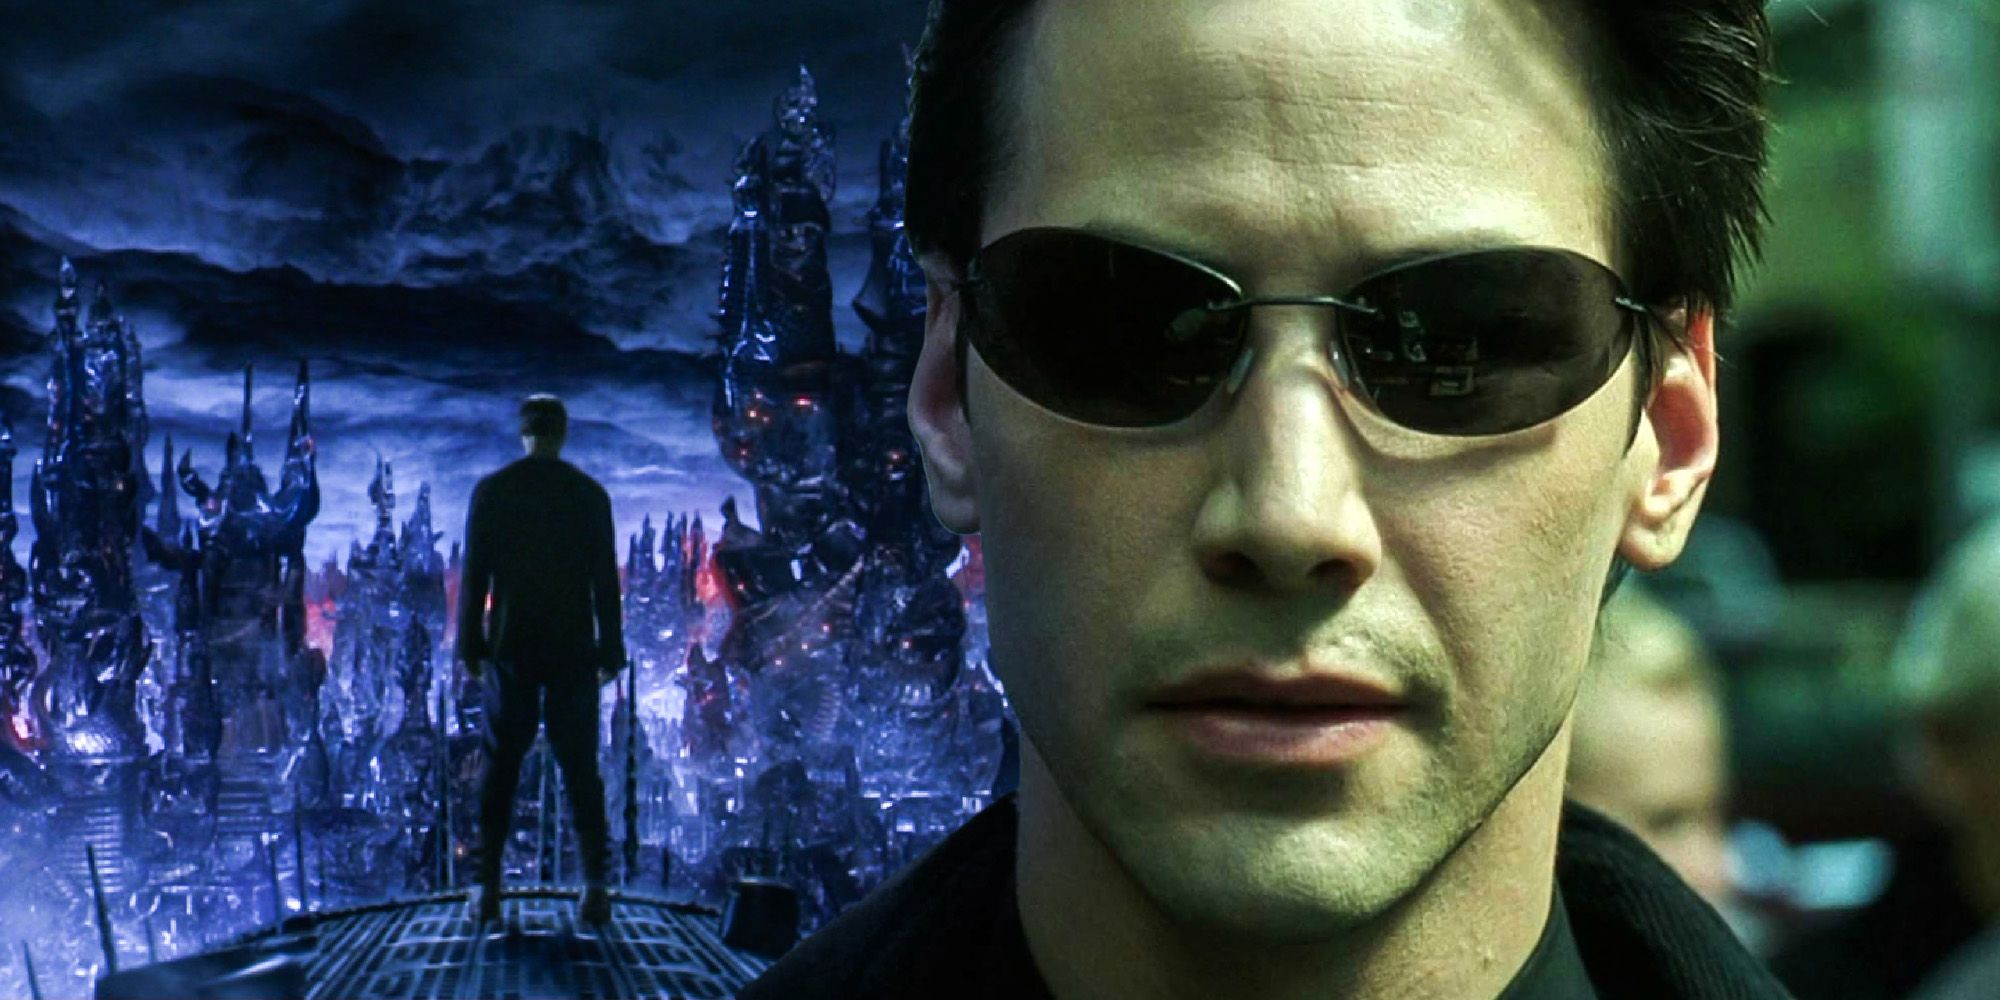 An image of Neo from Matrix Revolutions and another of him standing among the machines